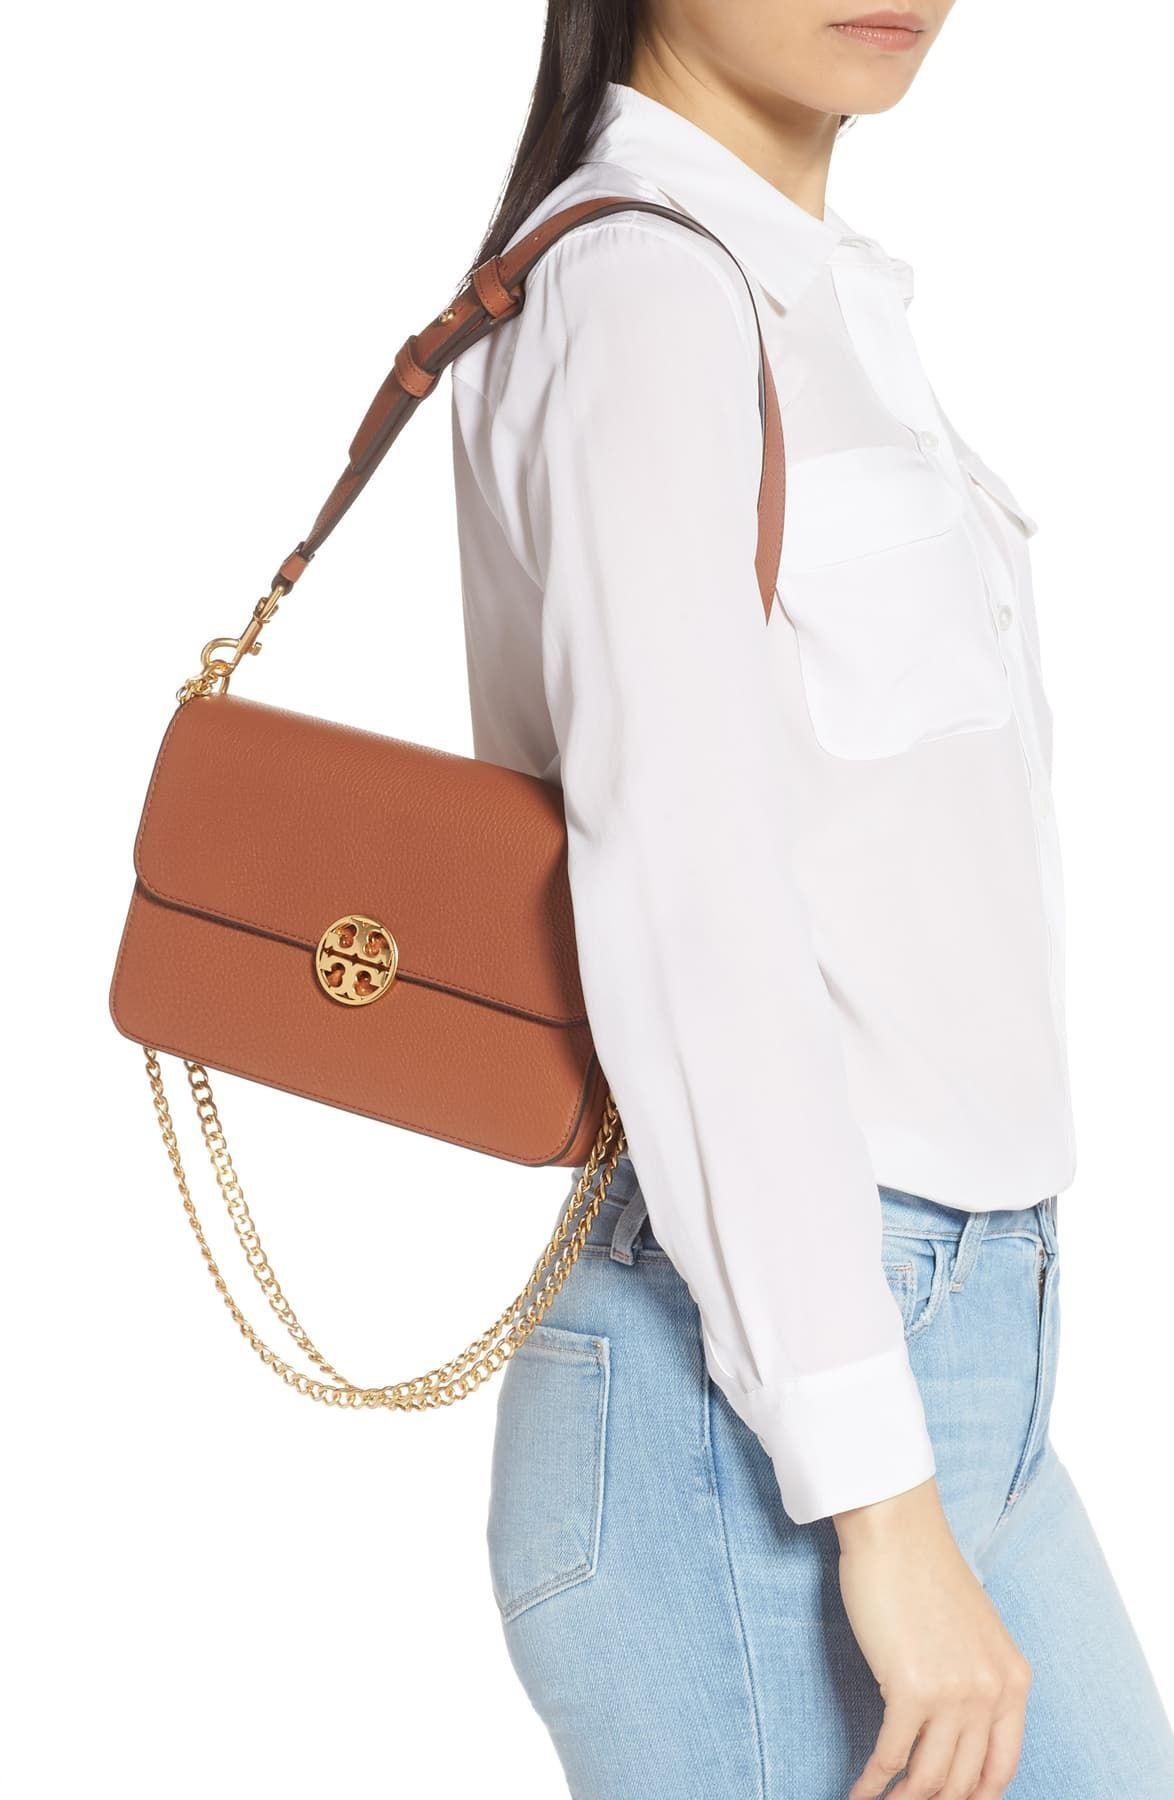 Tory Burch Chelsea Leather Shoulder Bag in Brown | Lyst